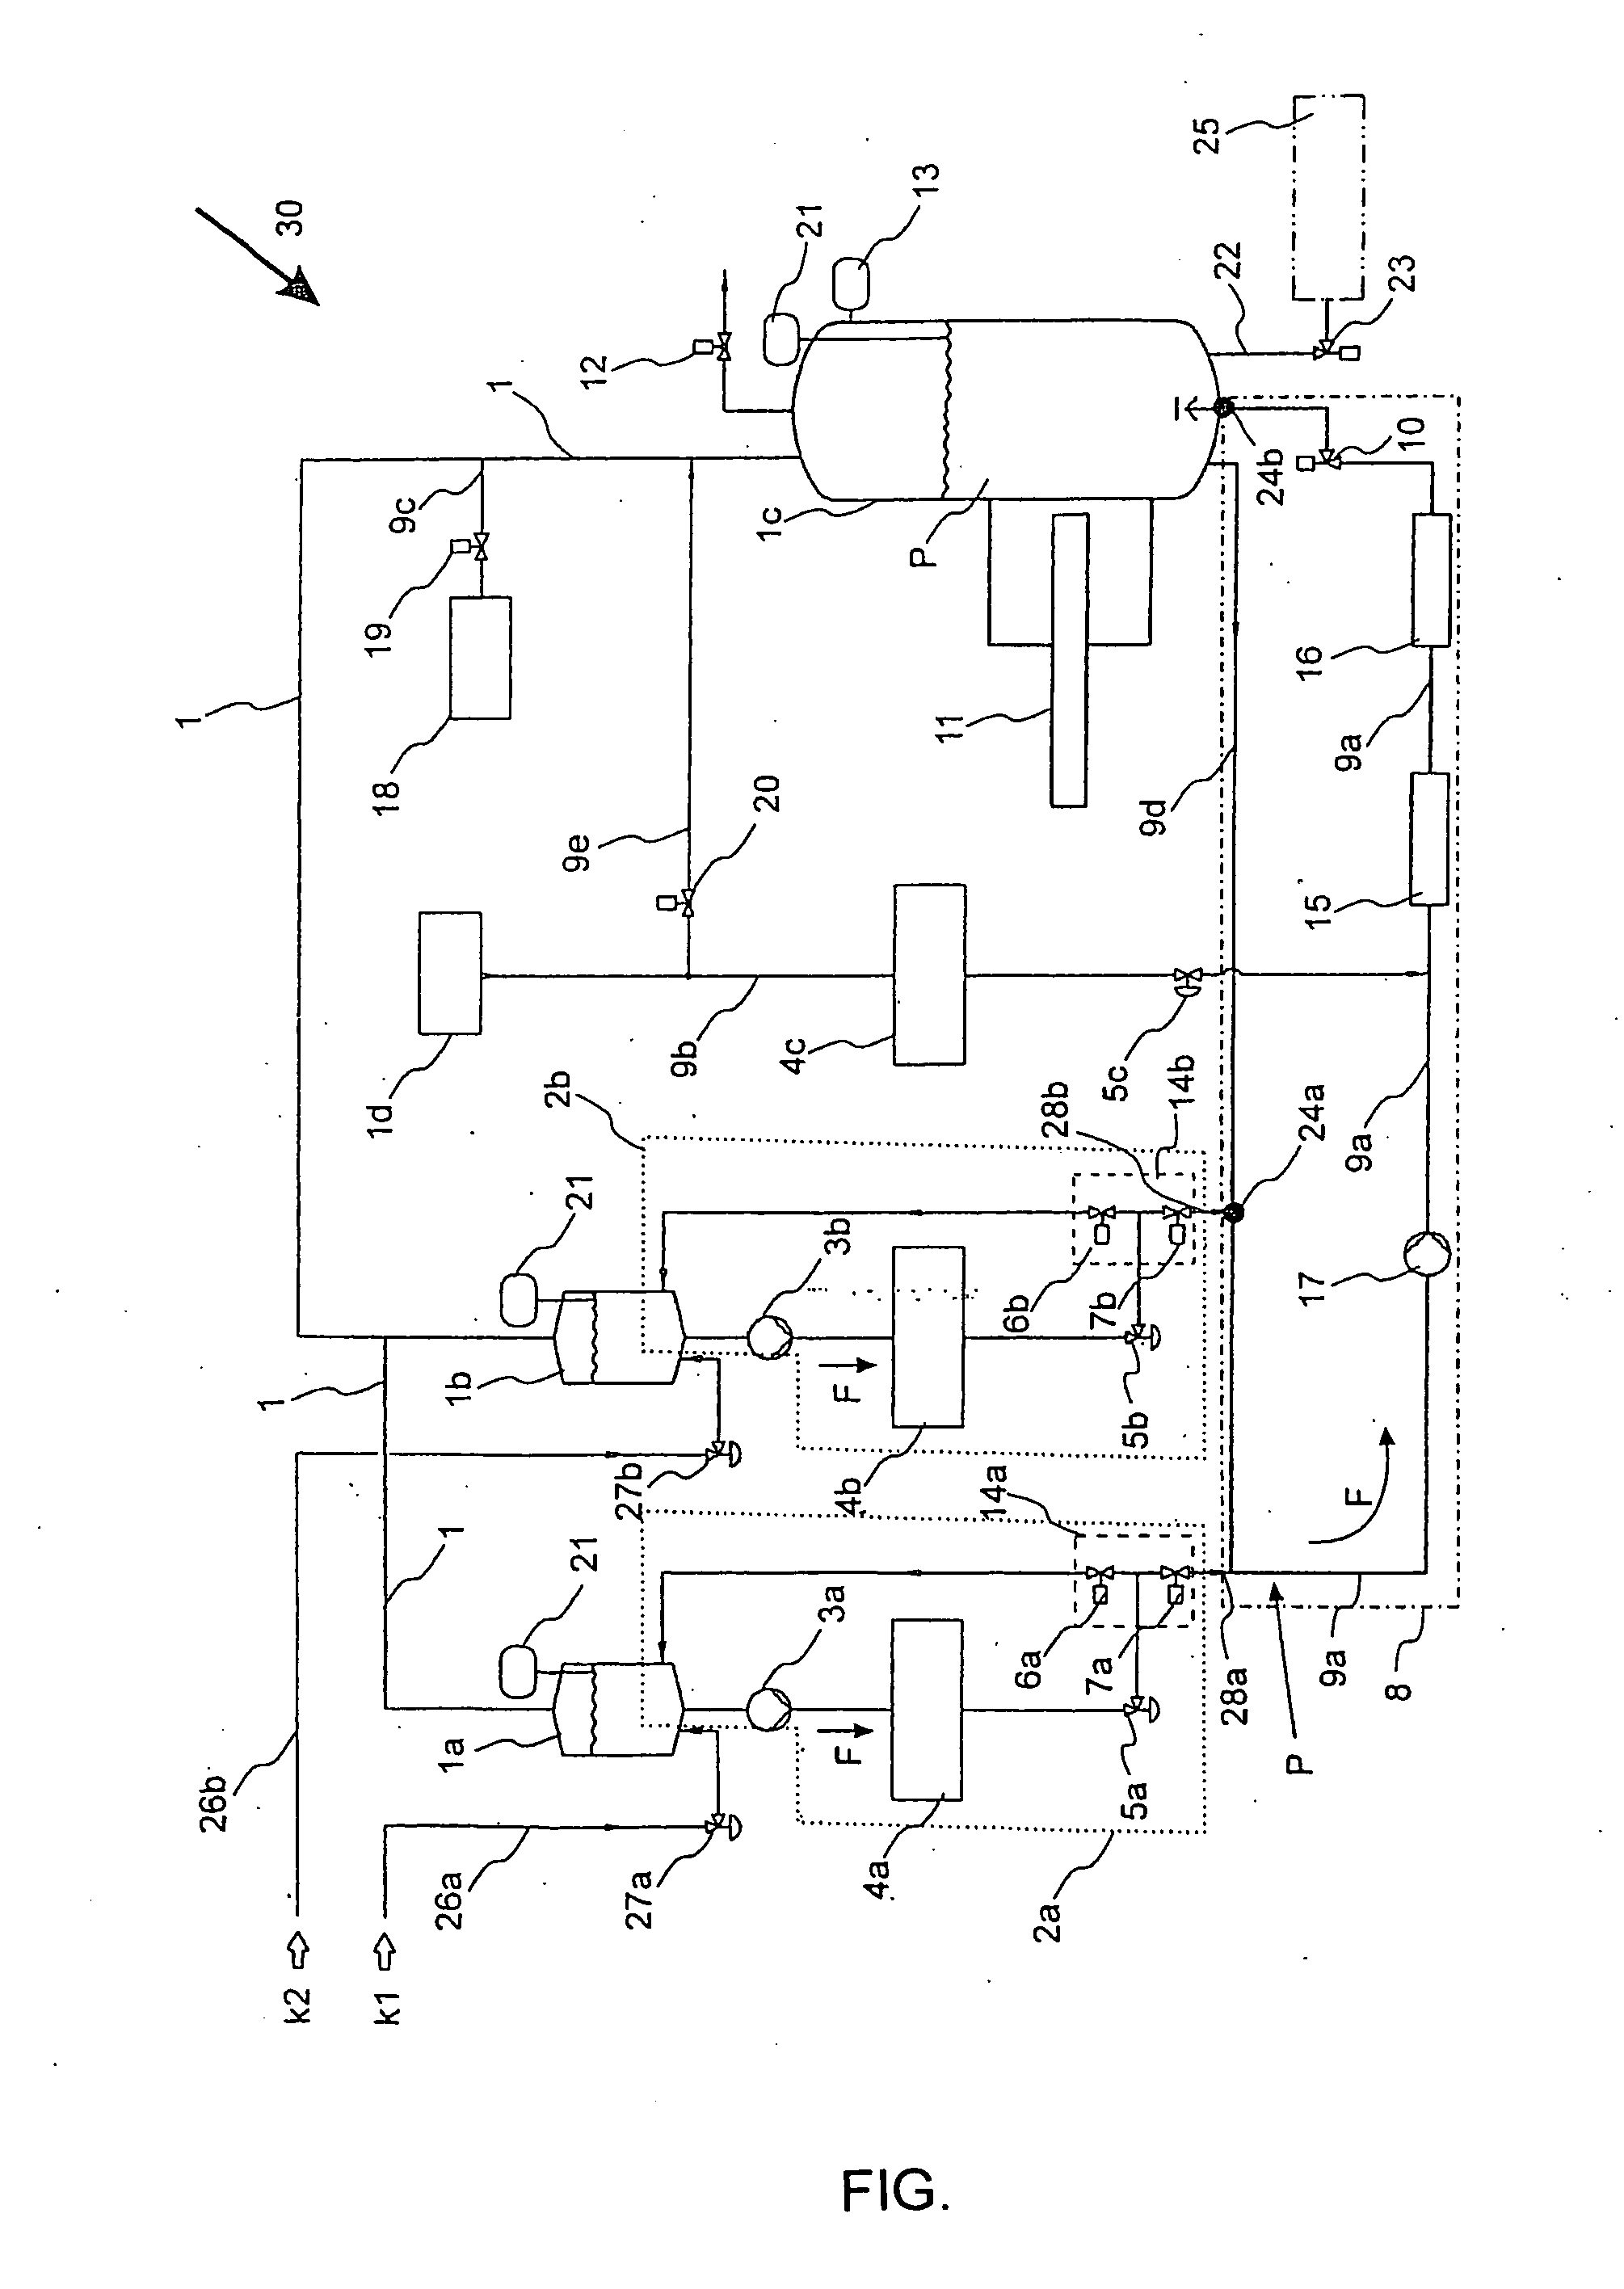 System and method for continuously producing a liquid mixture